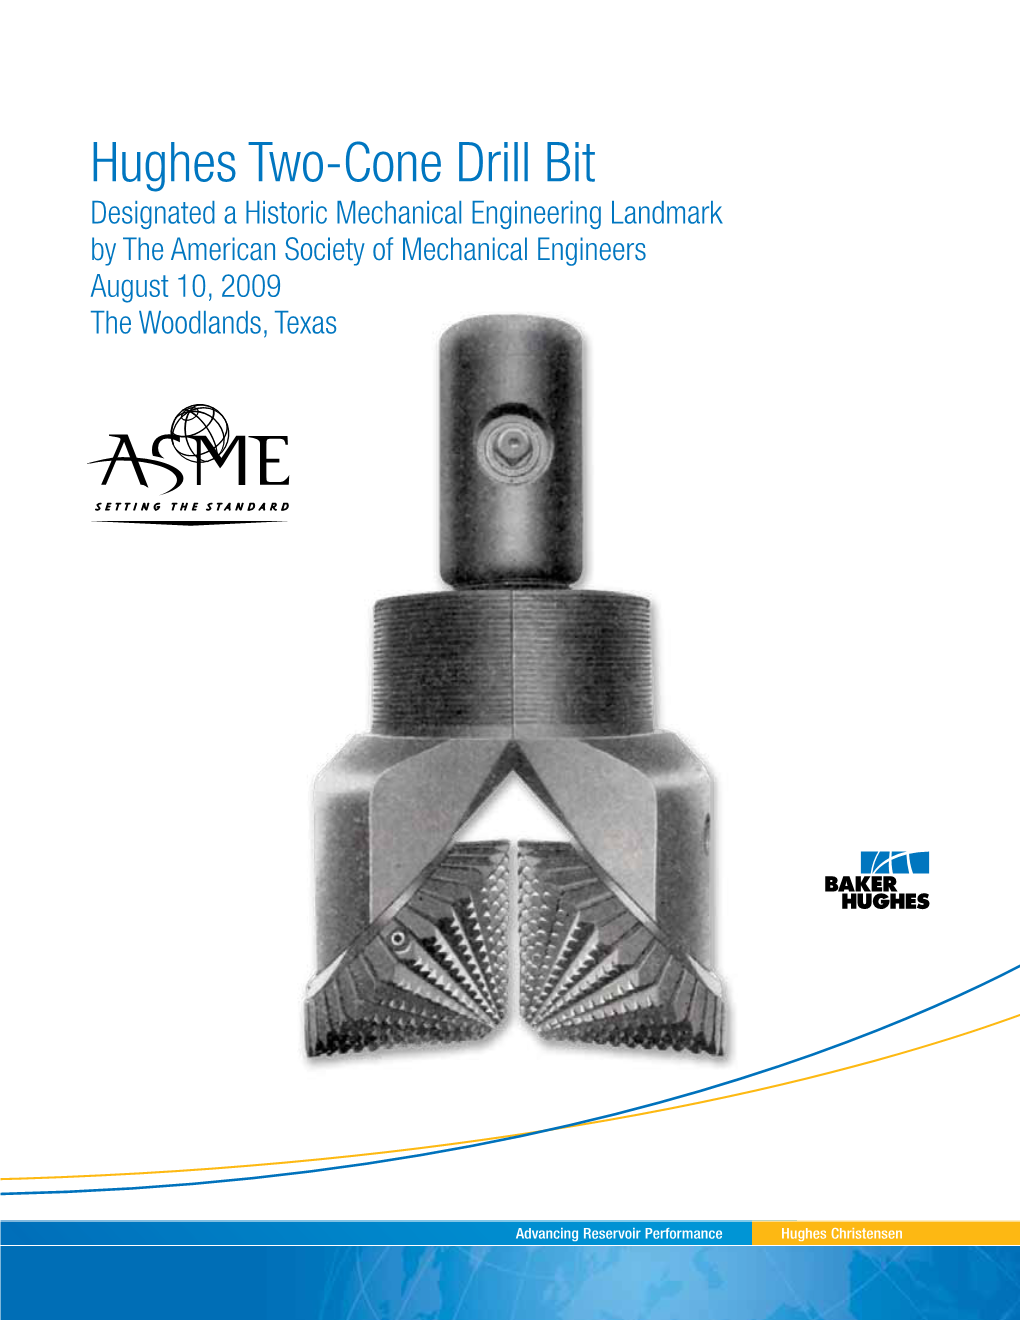 Hughes Two-Cone Drill Bit Designated a Historic Mechanical Engineering Landmark by the American Society of Mechanical Engineers August 10, 2009 the Woodlands, Texas